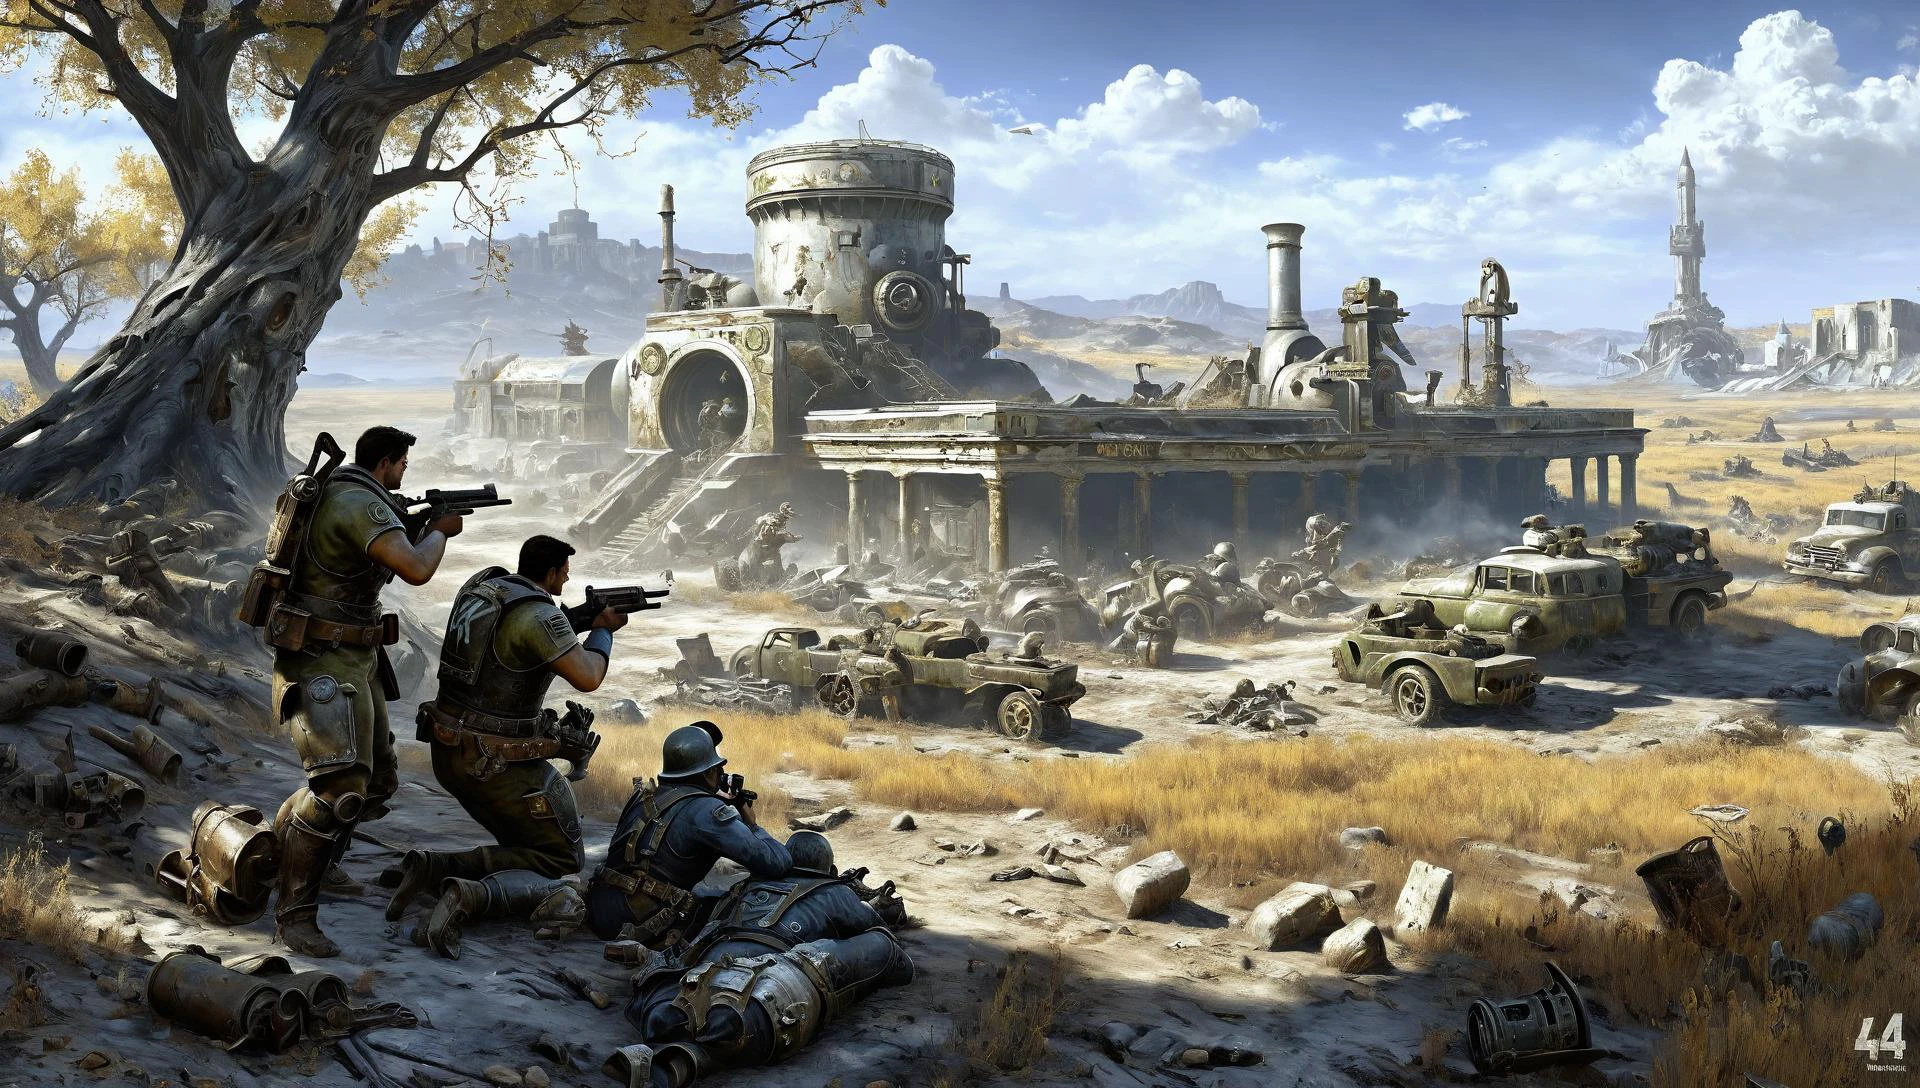 Painting of fallout4 war detailed in america , style of ancient academic mythological by Henryk Siemiradzki, 